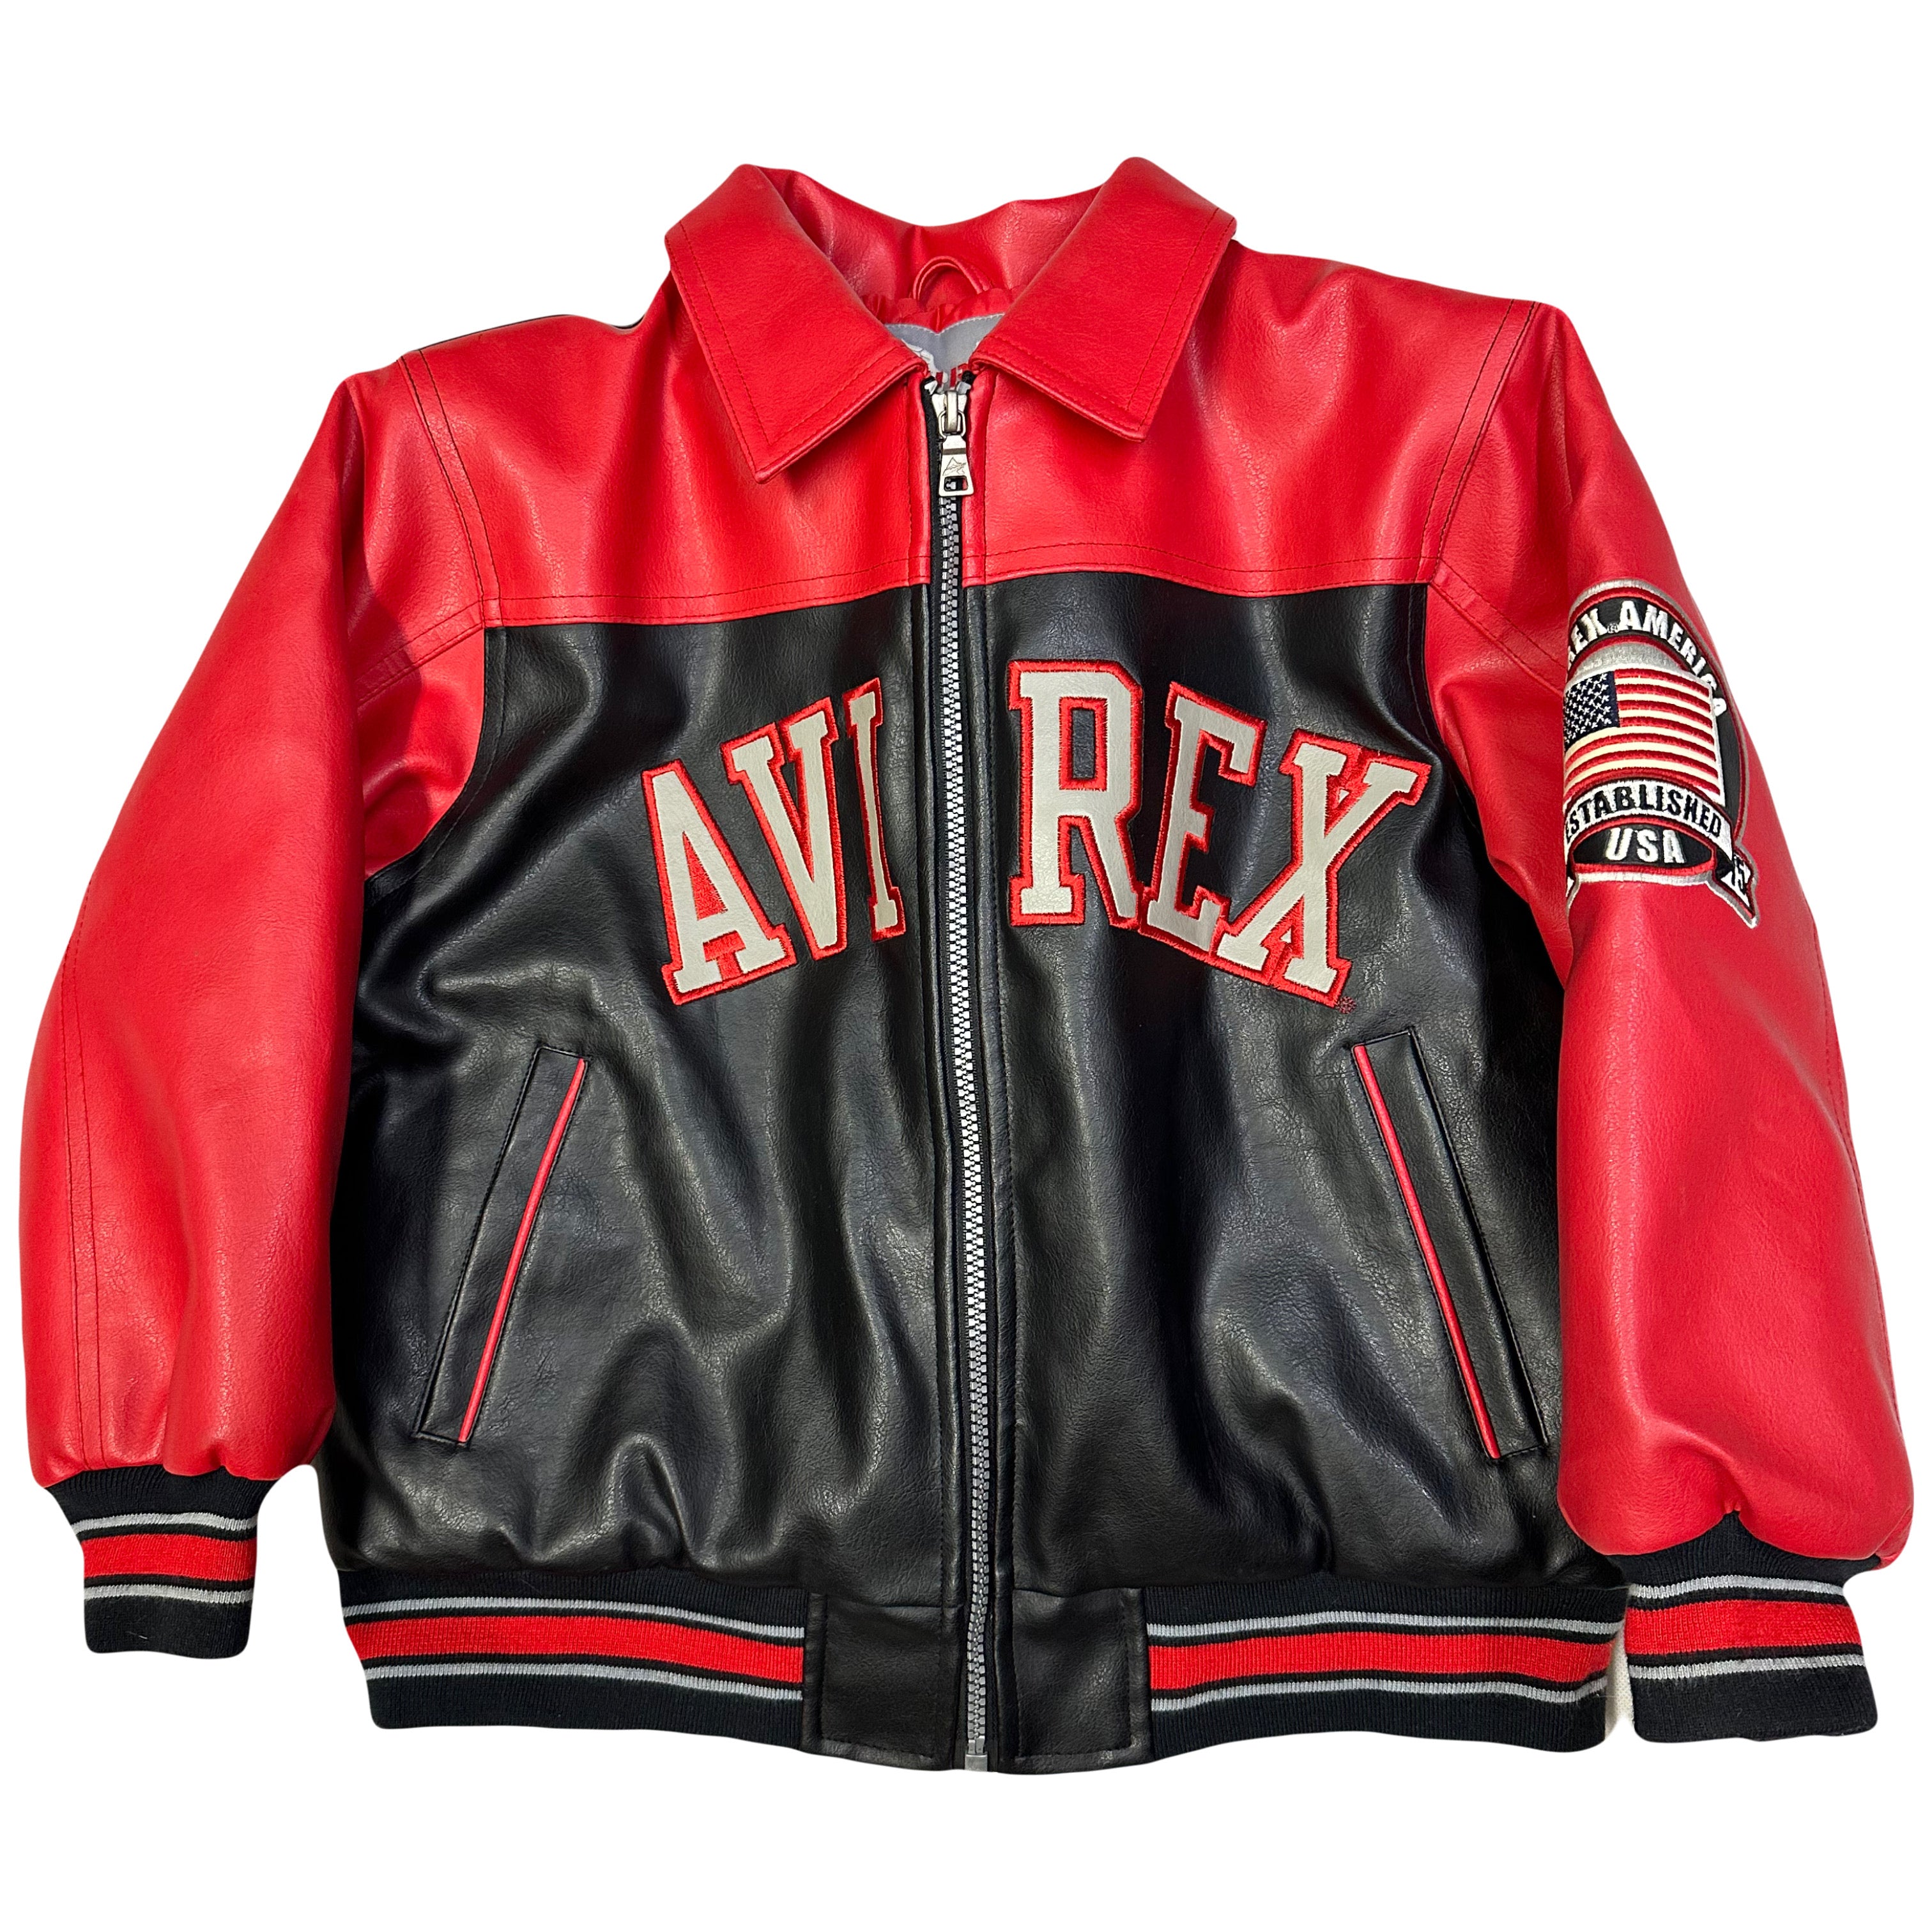 Avirex Kids Leather Jacket In Red & Black ( 8-10 )